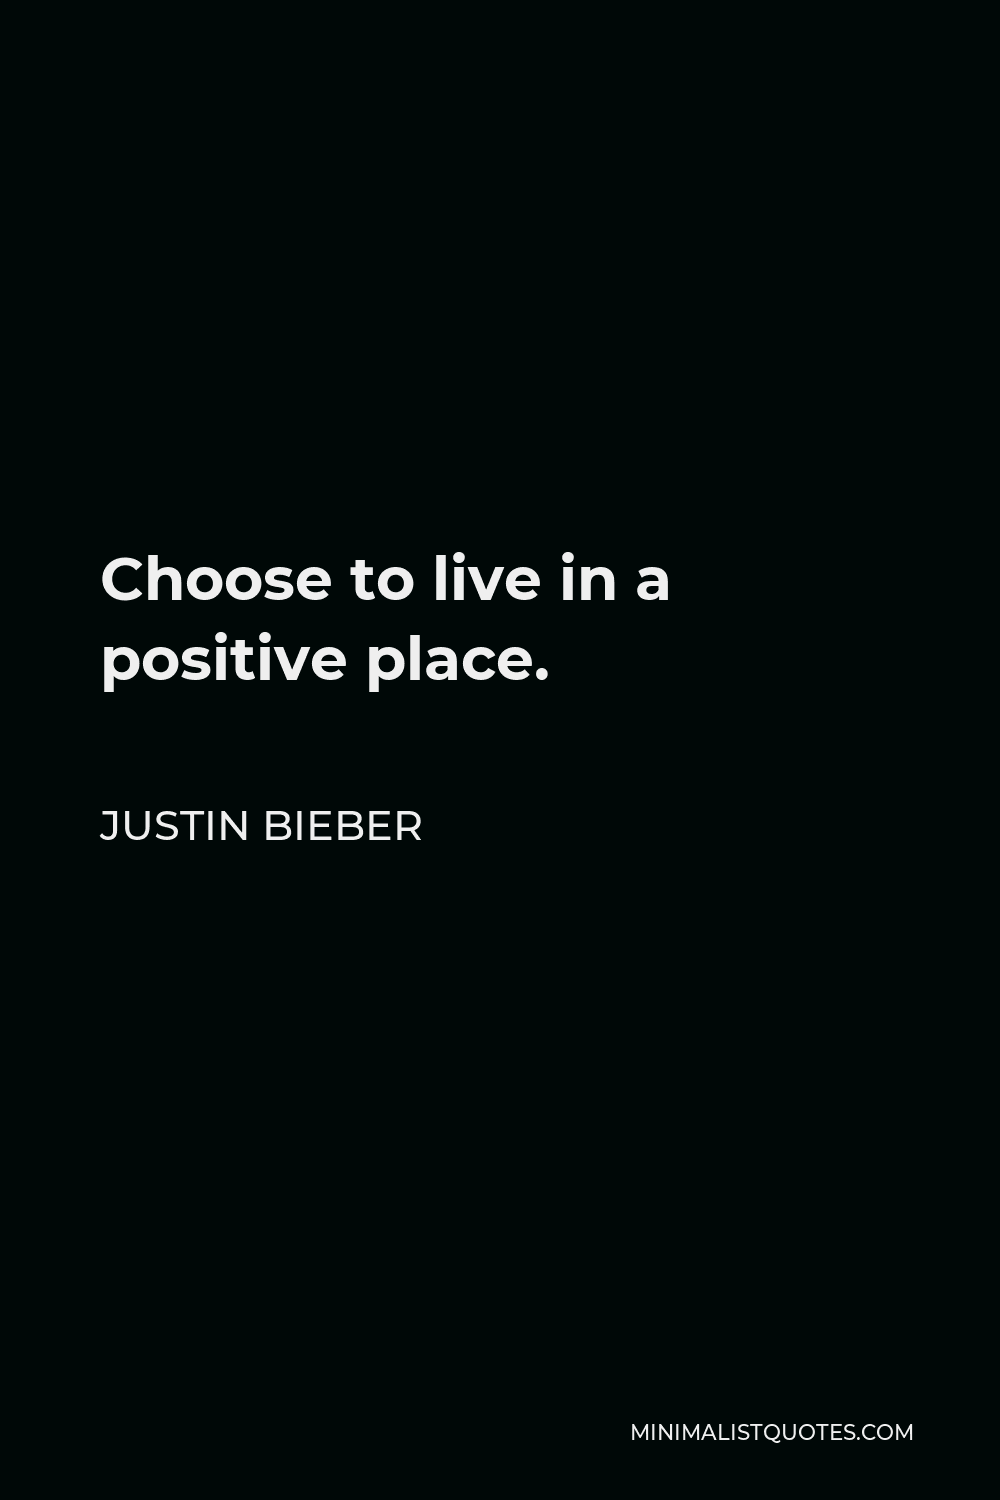 Justin Bieber Quote - Choose to live in a positive place.